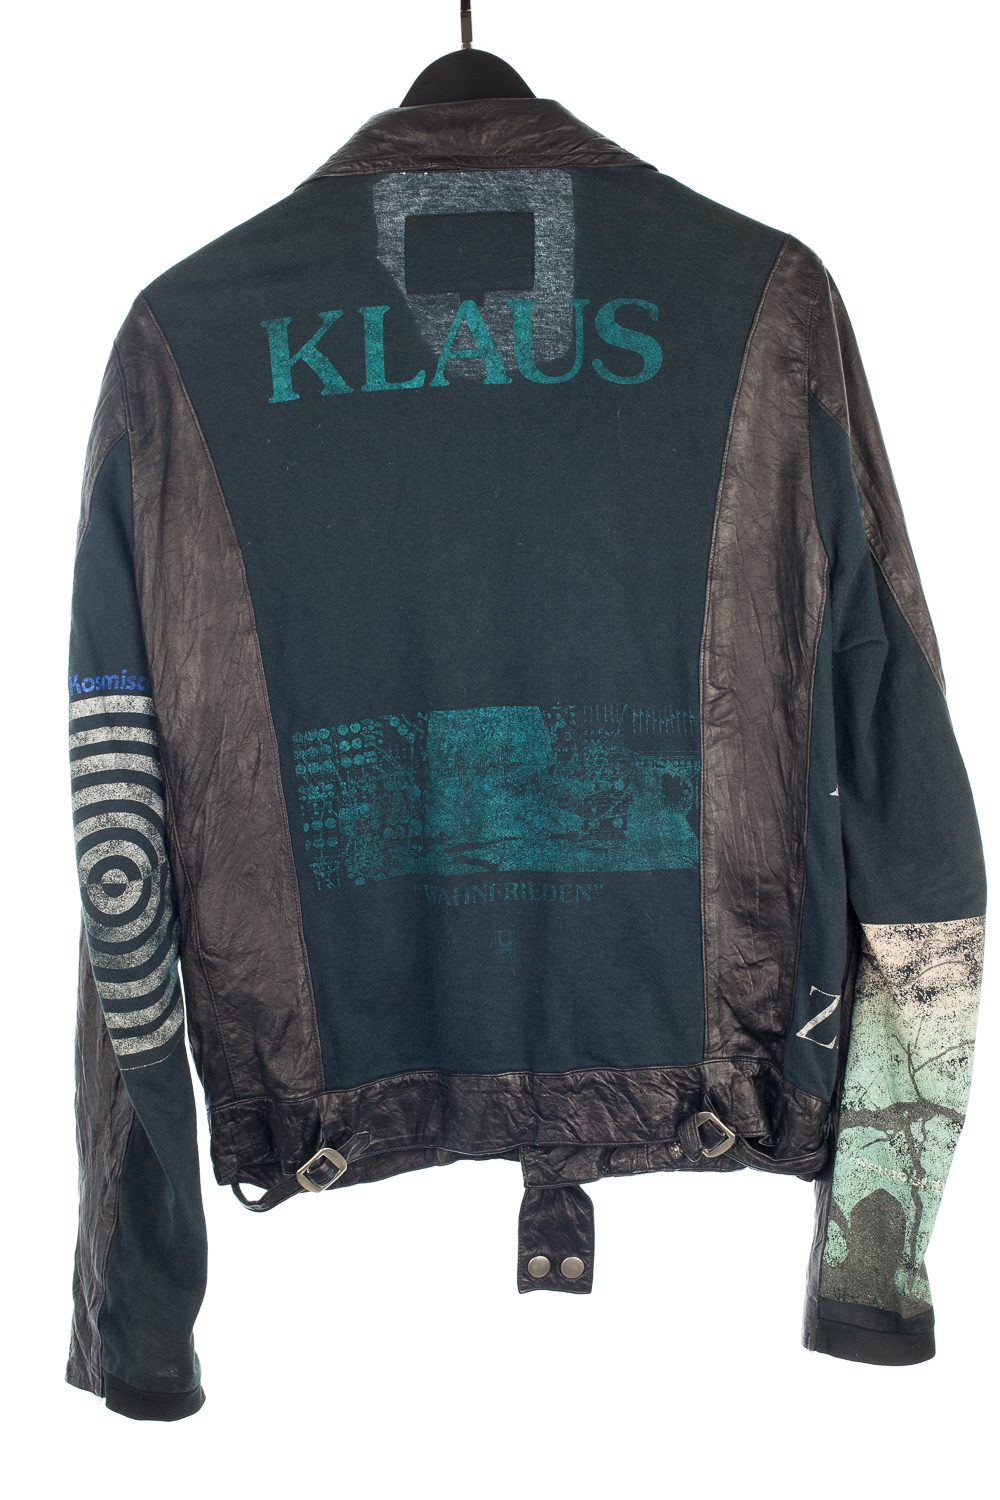 SS06 Klaus/Zamiang Reconstructed Leather Jacket